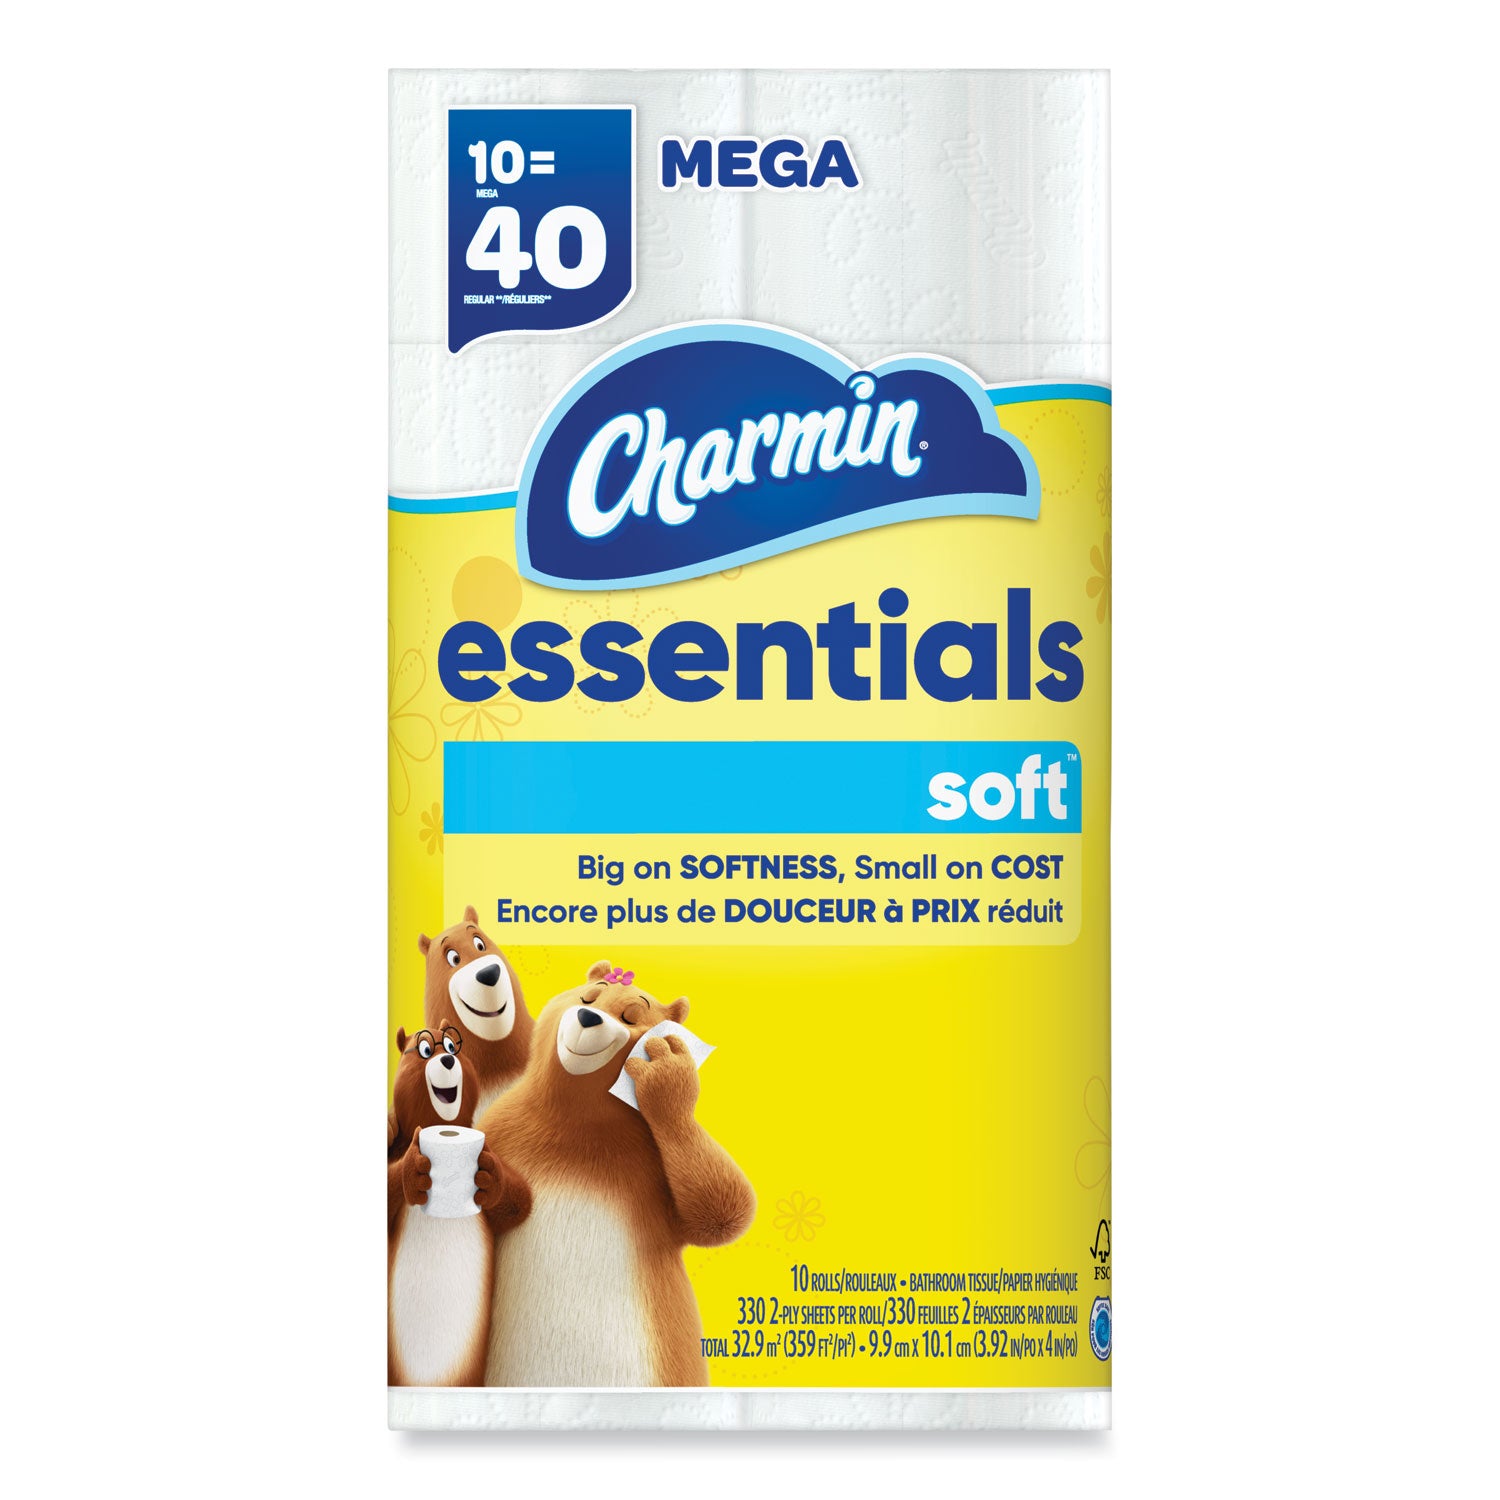 essentials-soft-bathroom-tissue-septic-safe-2-ply-white-352-sheets-roll-30-rolls-carton_pgc67355 - 1